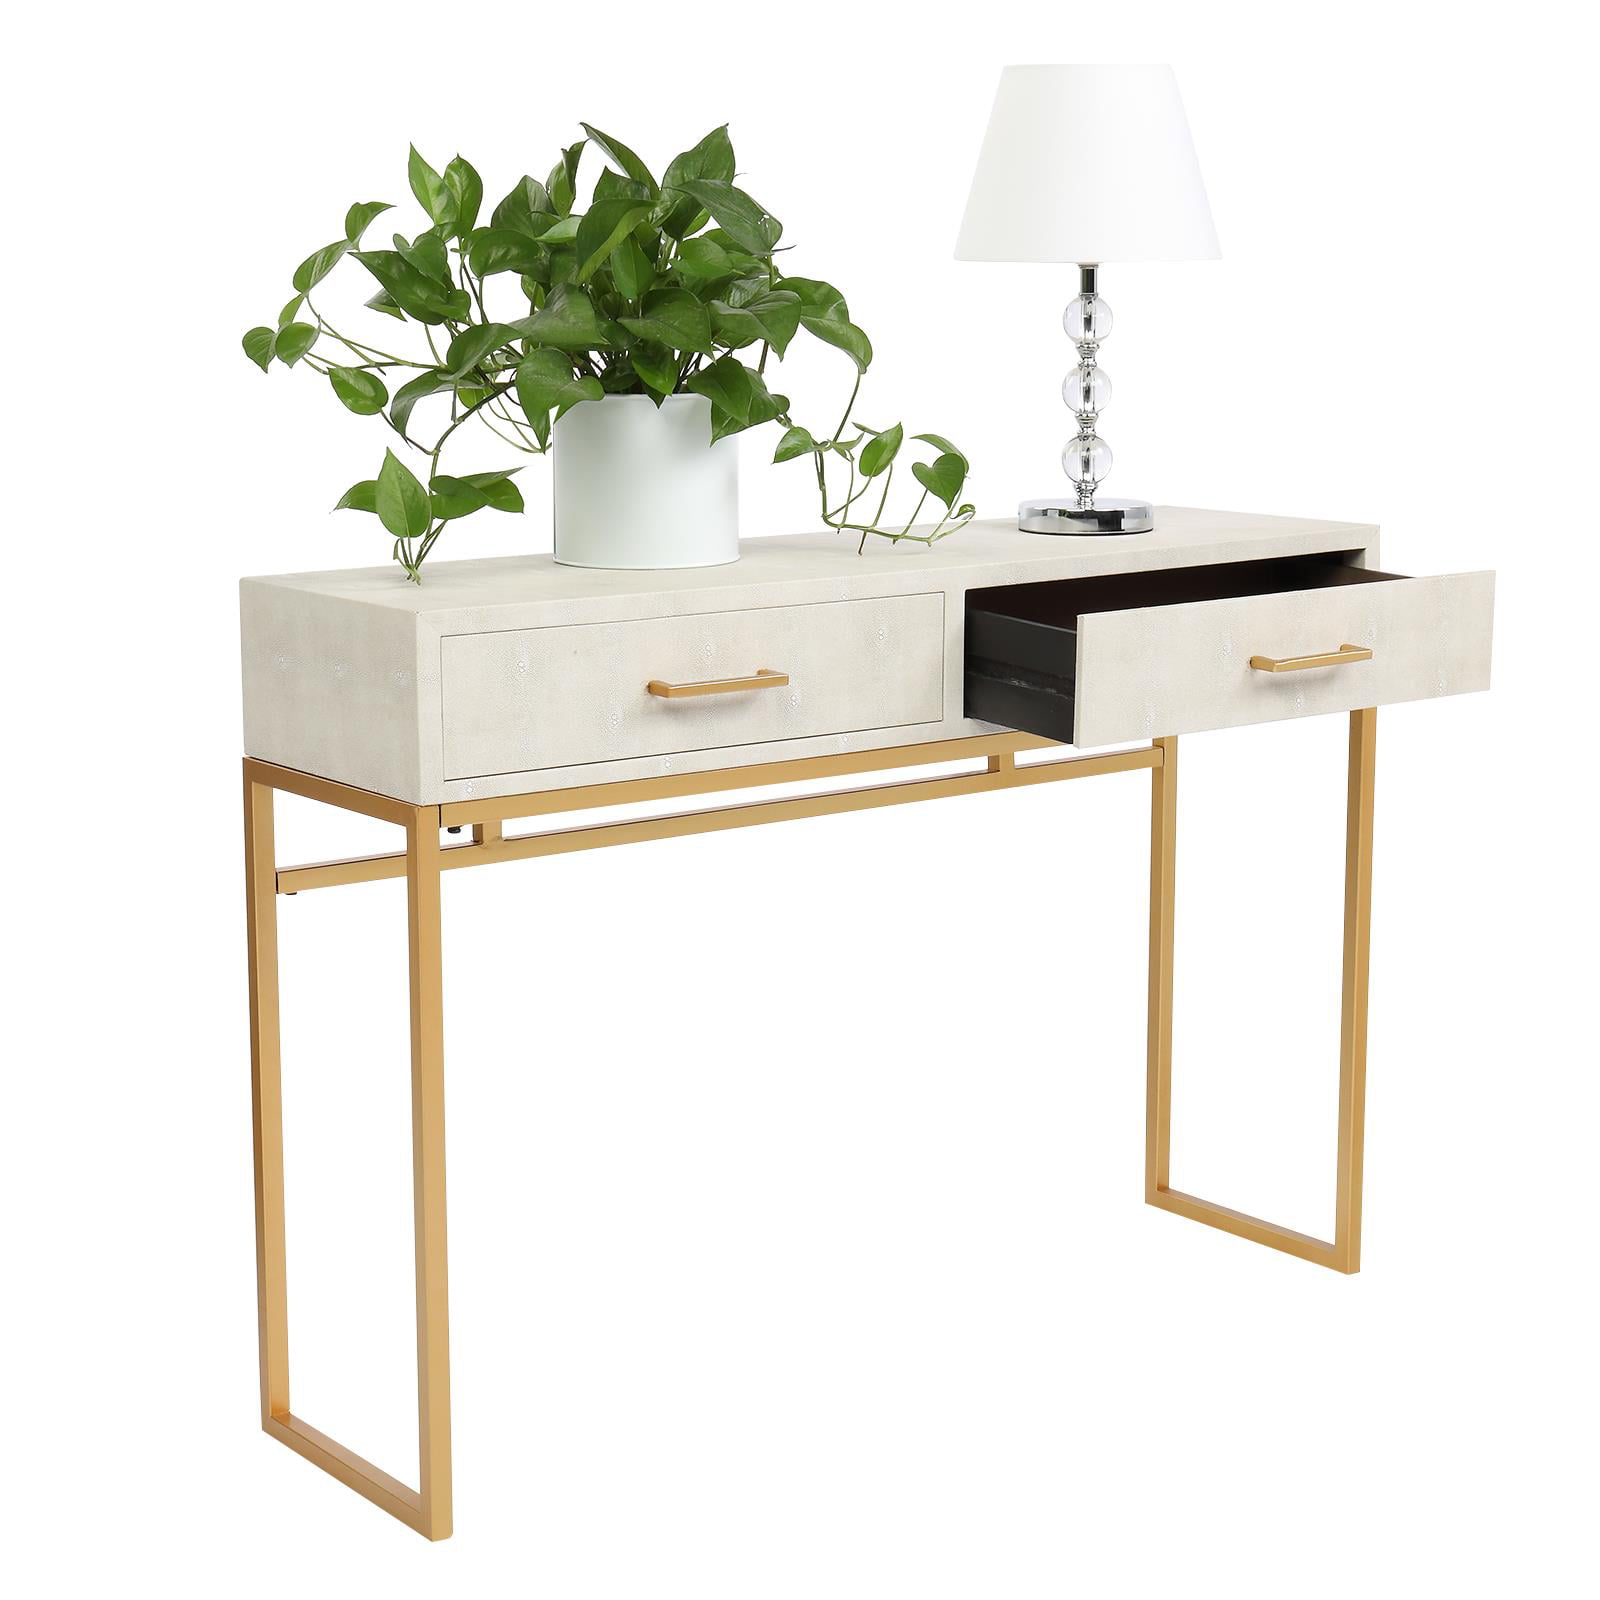 Ktaxon Console Table Sofa, Sofa Table Desk With Drawers